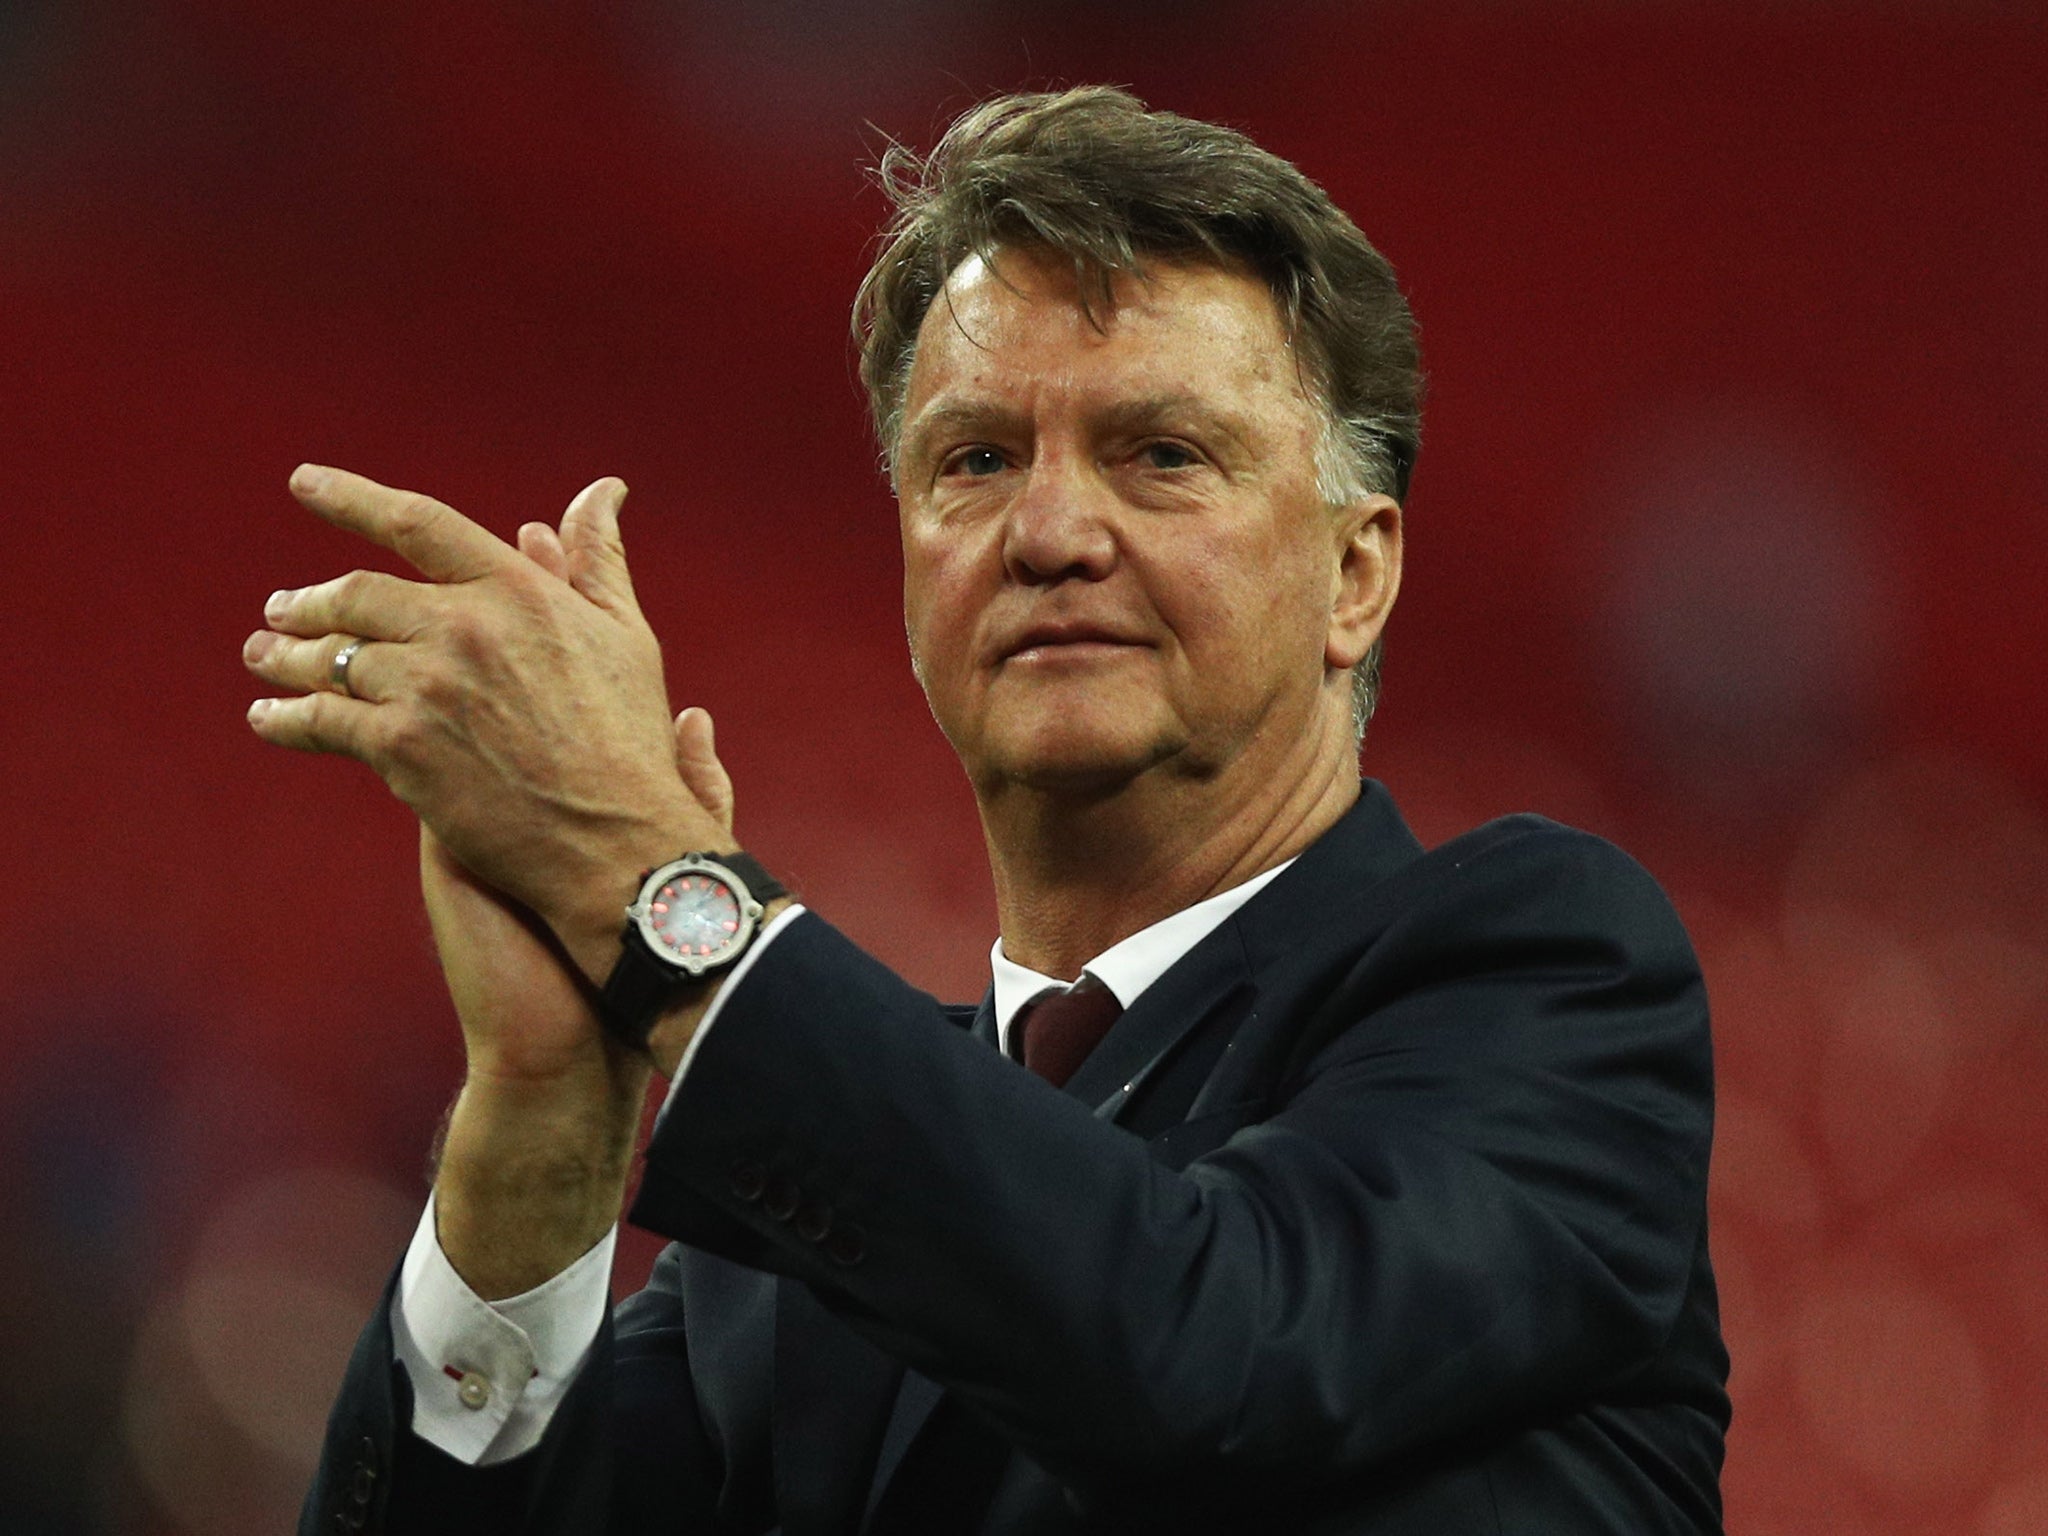 Van Gaal is expected to lose his job just two days after winning the FA Cup